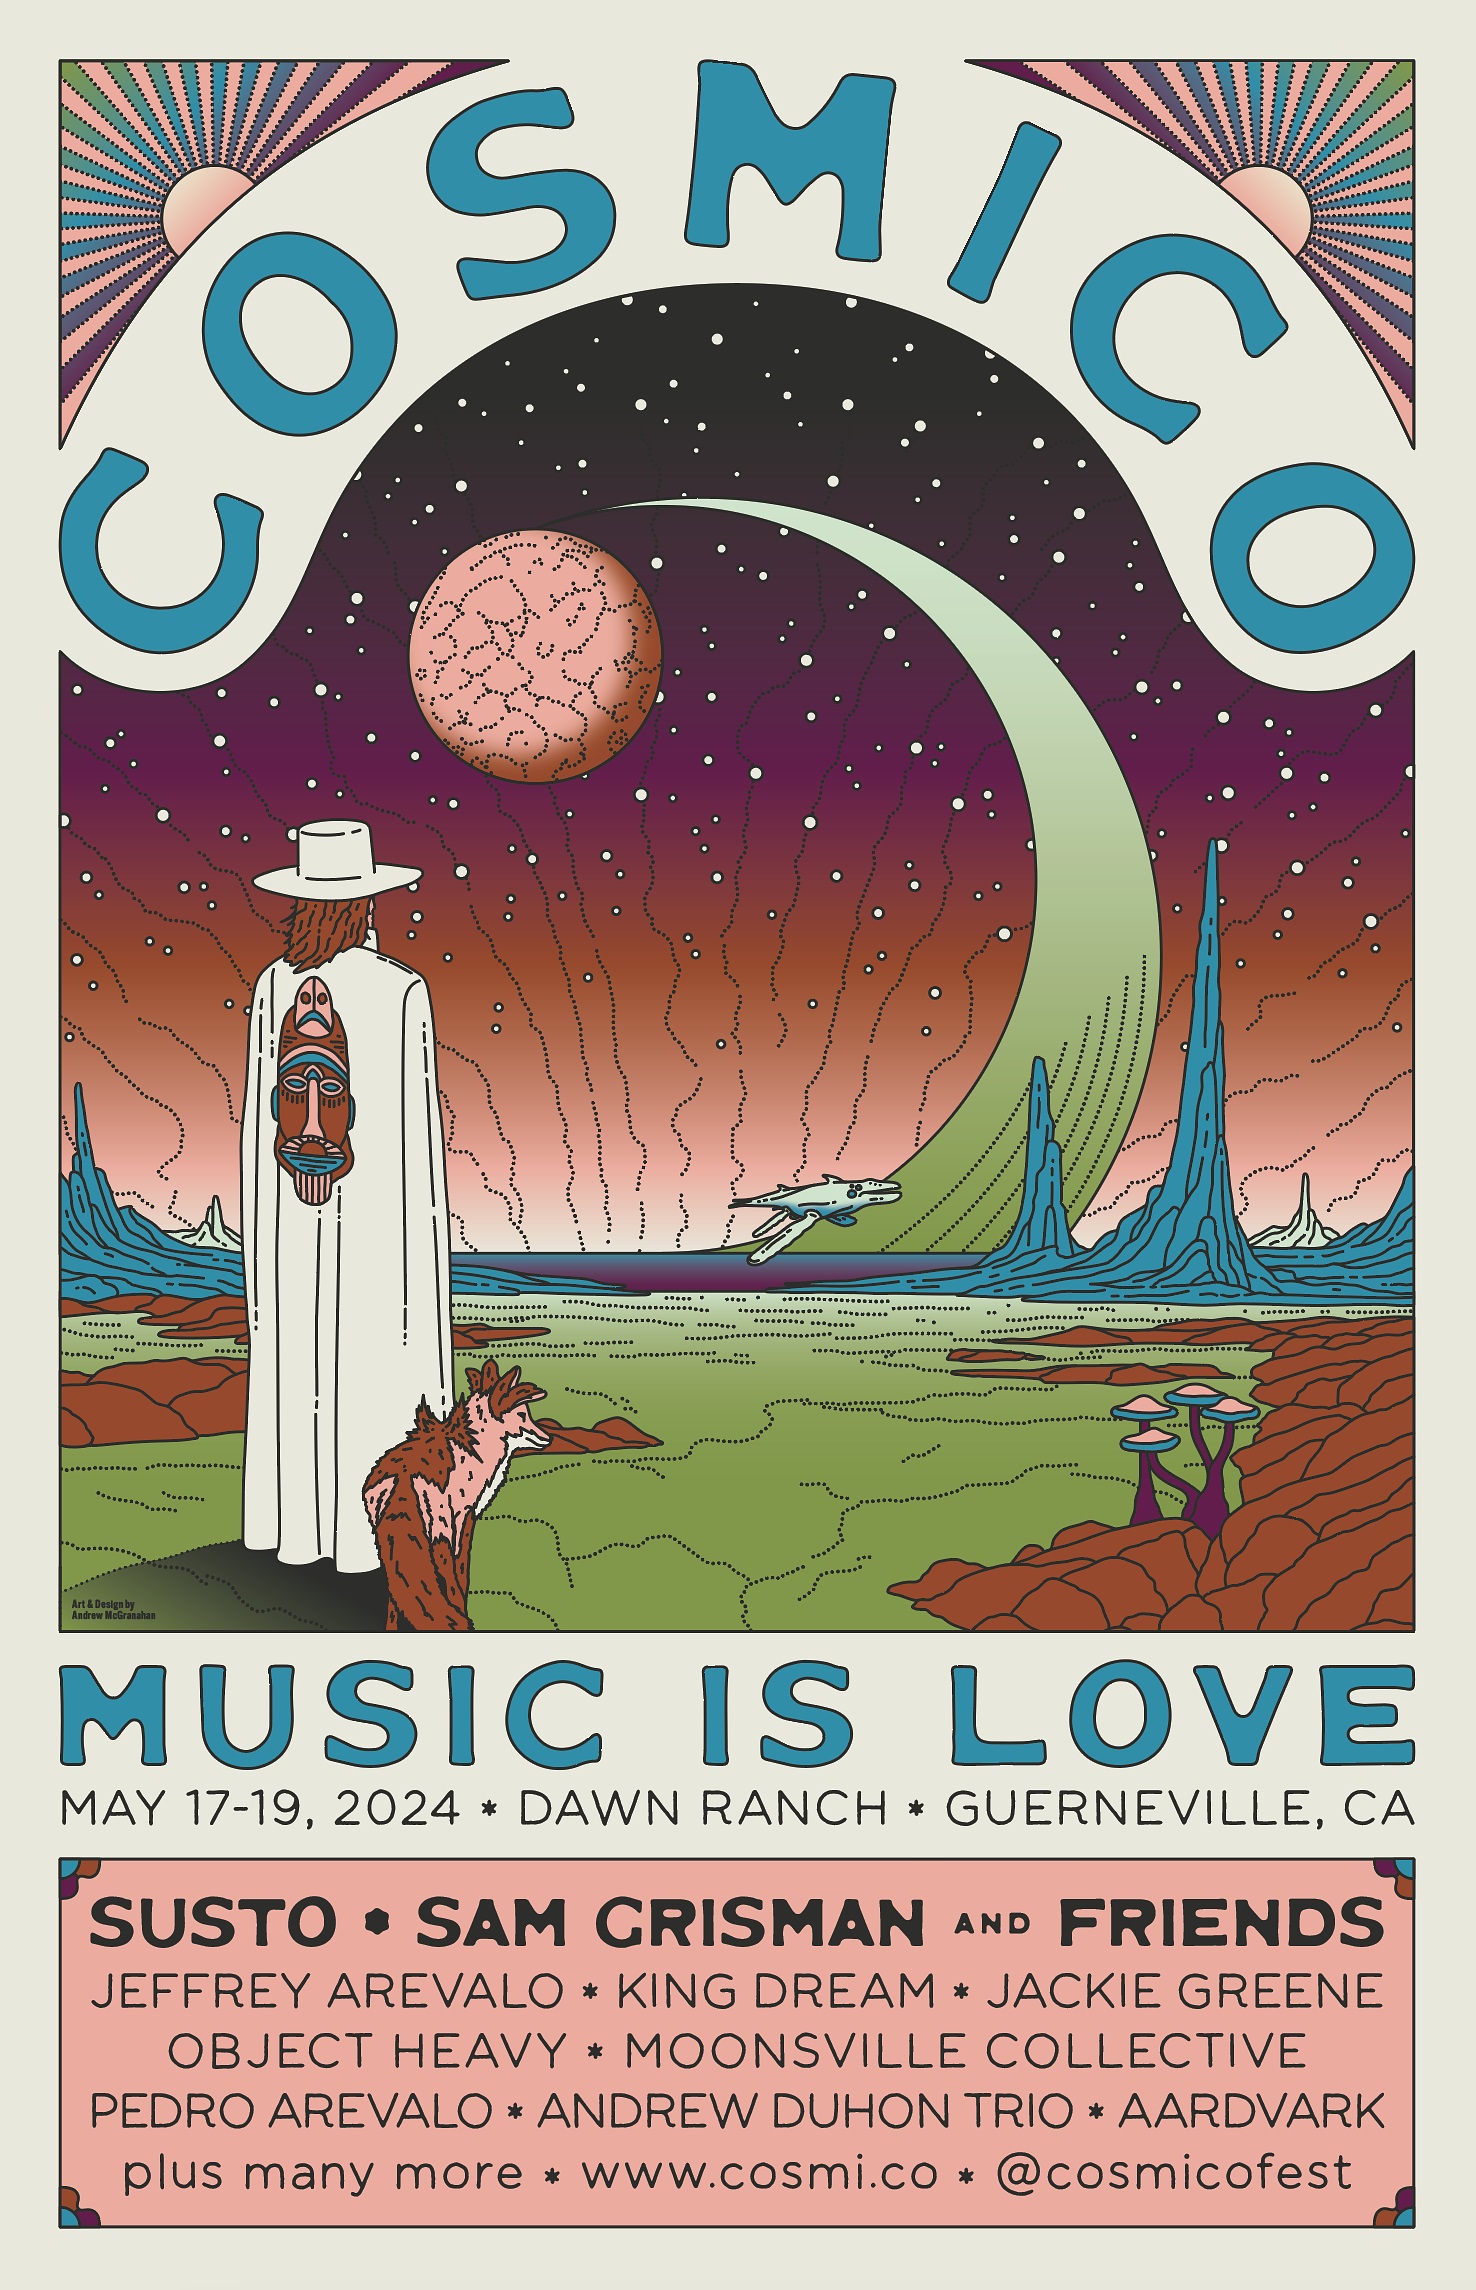 Announcing the 5th Annual Cosmico Music and Arts Festival | May 17- 19, 2024 at Dawn Ranch, Guerneville, CA